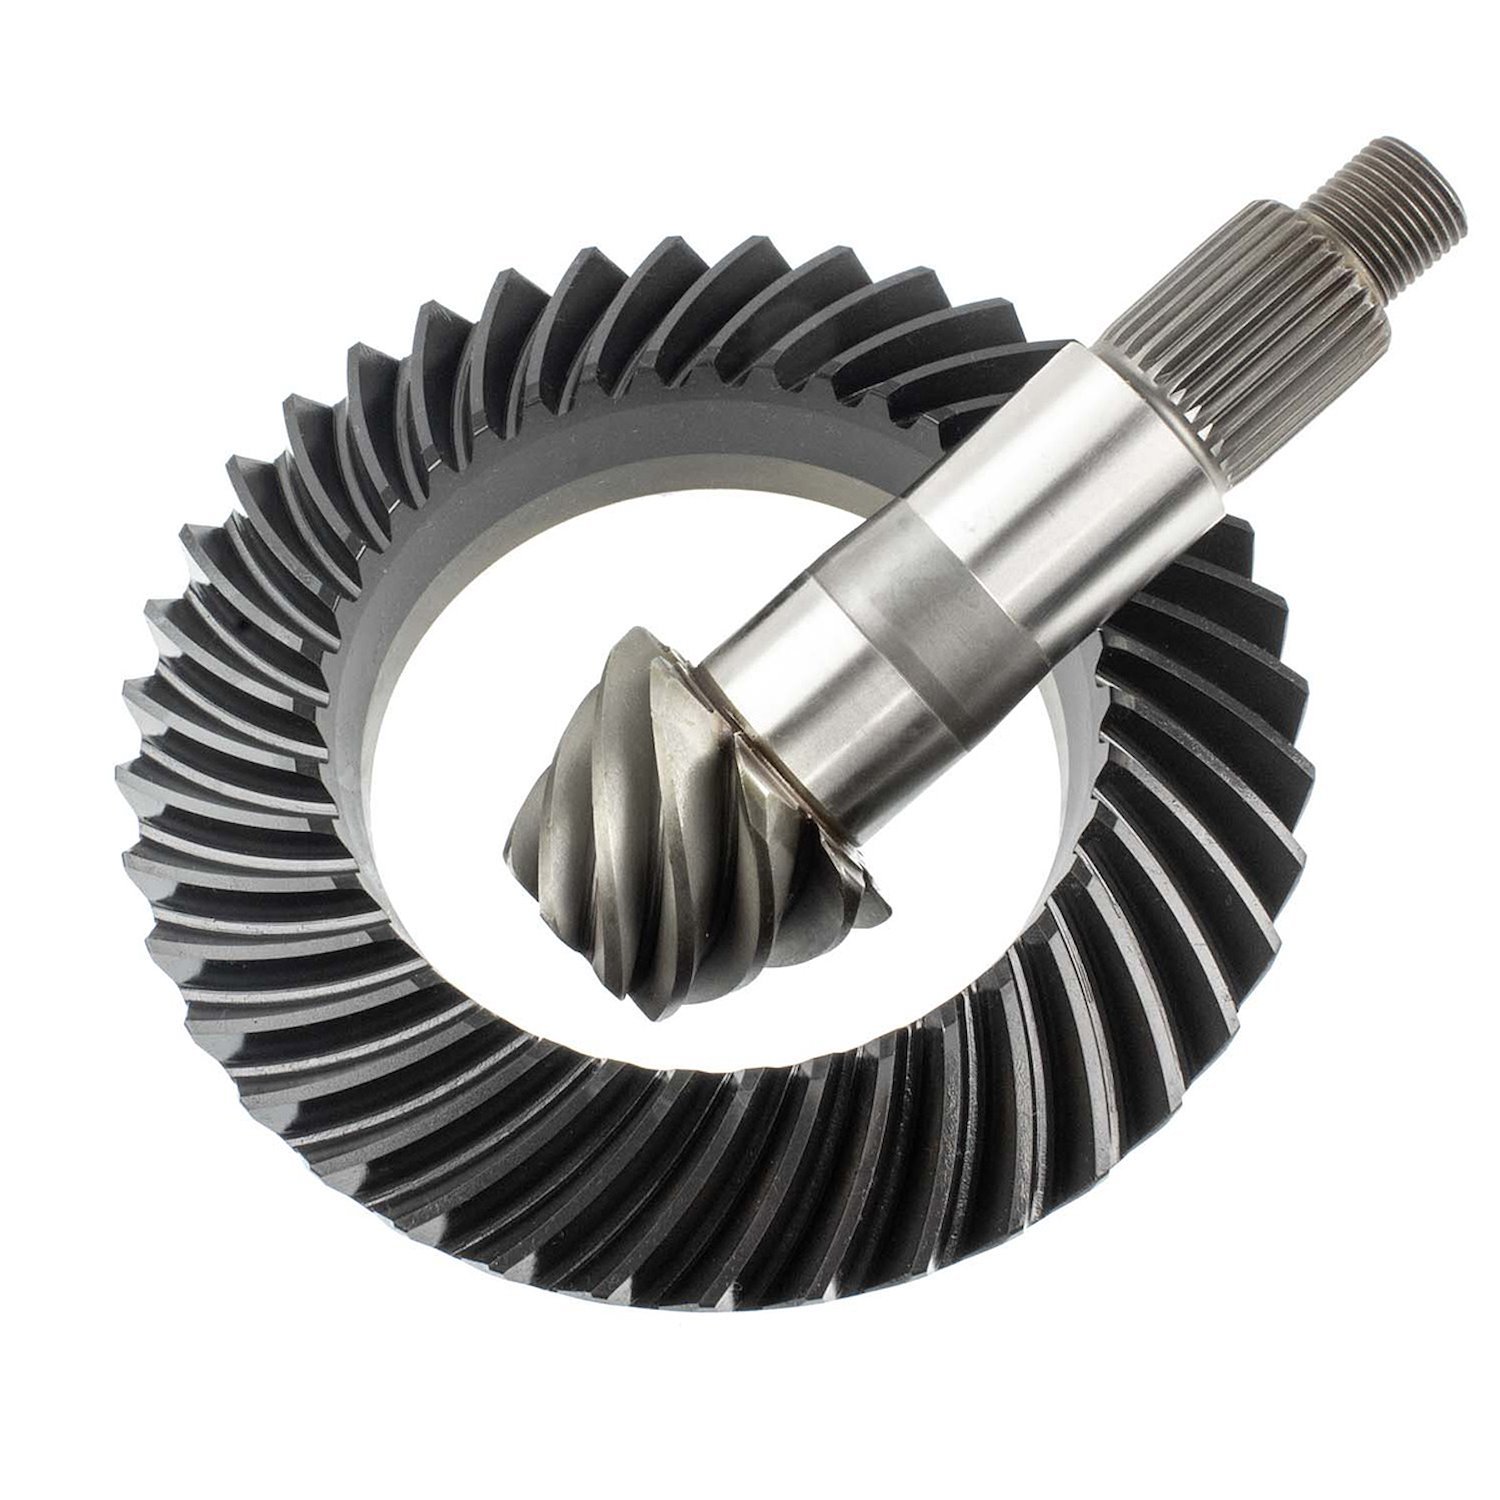 Ring & Pinion Gears for Jeep Wrangler JL - Ratio: 4.88